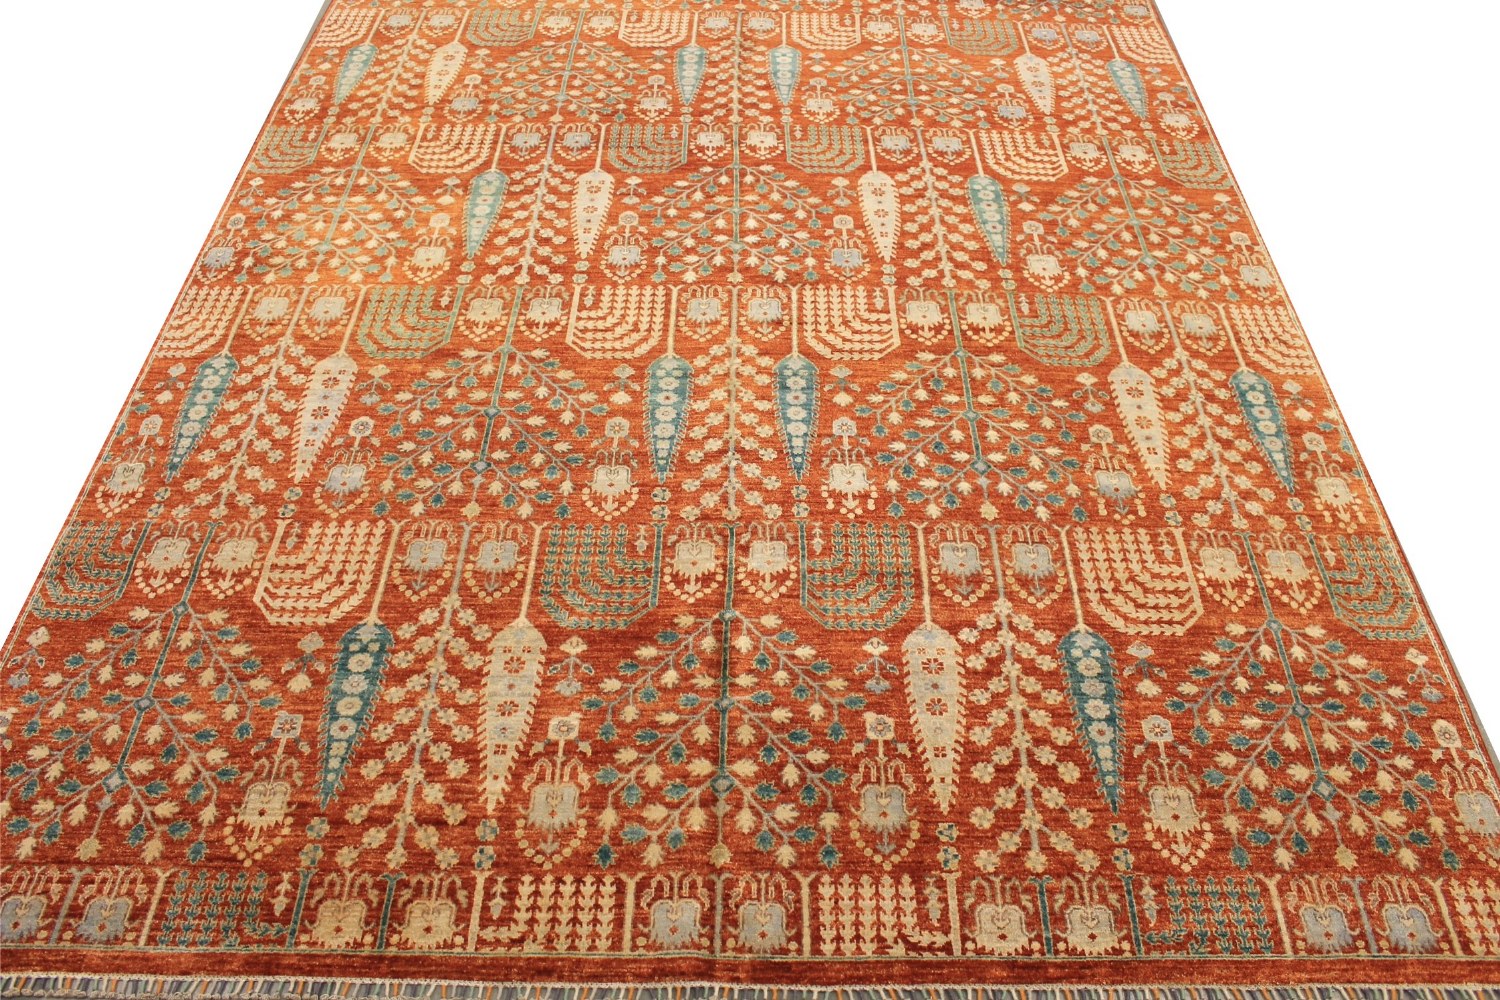 10x14 Aryana & Antique Revivals Hand Knotted Wool Area Rug - MR026145